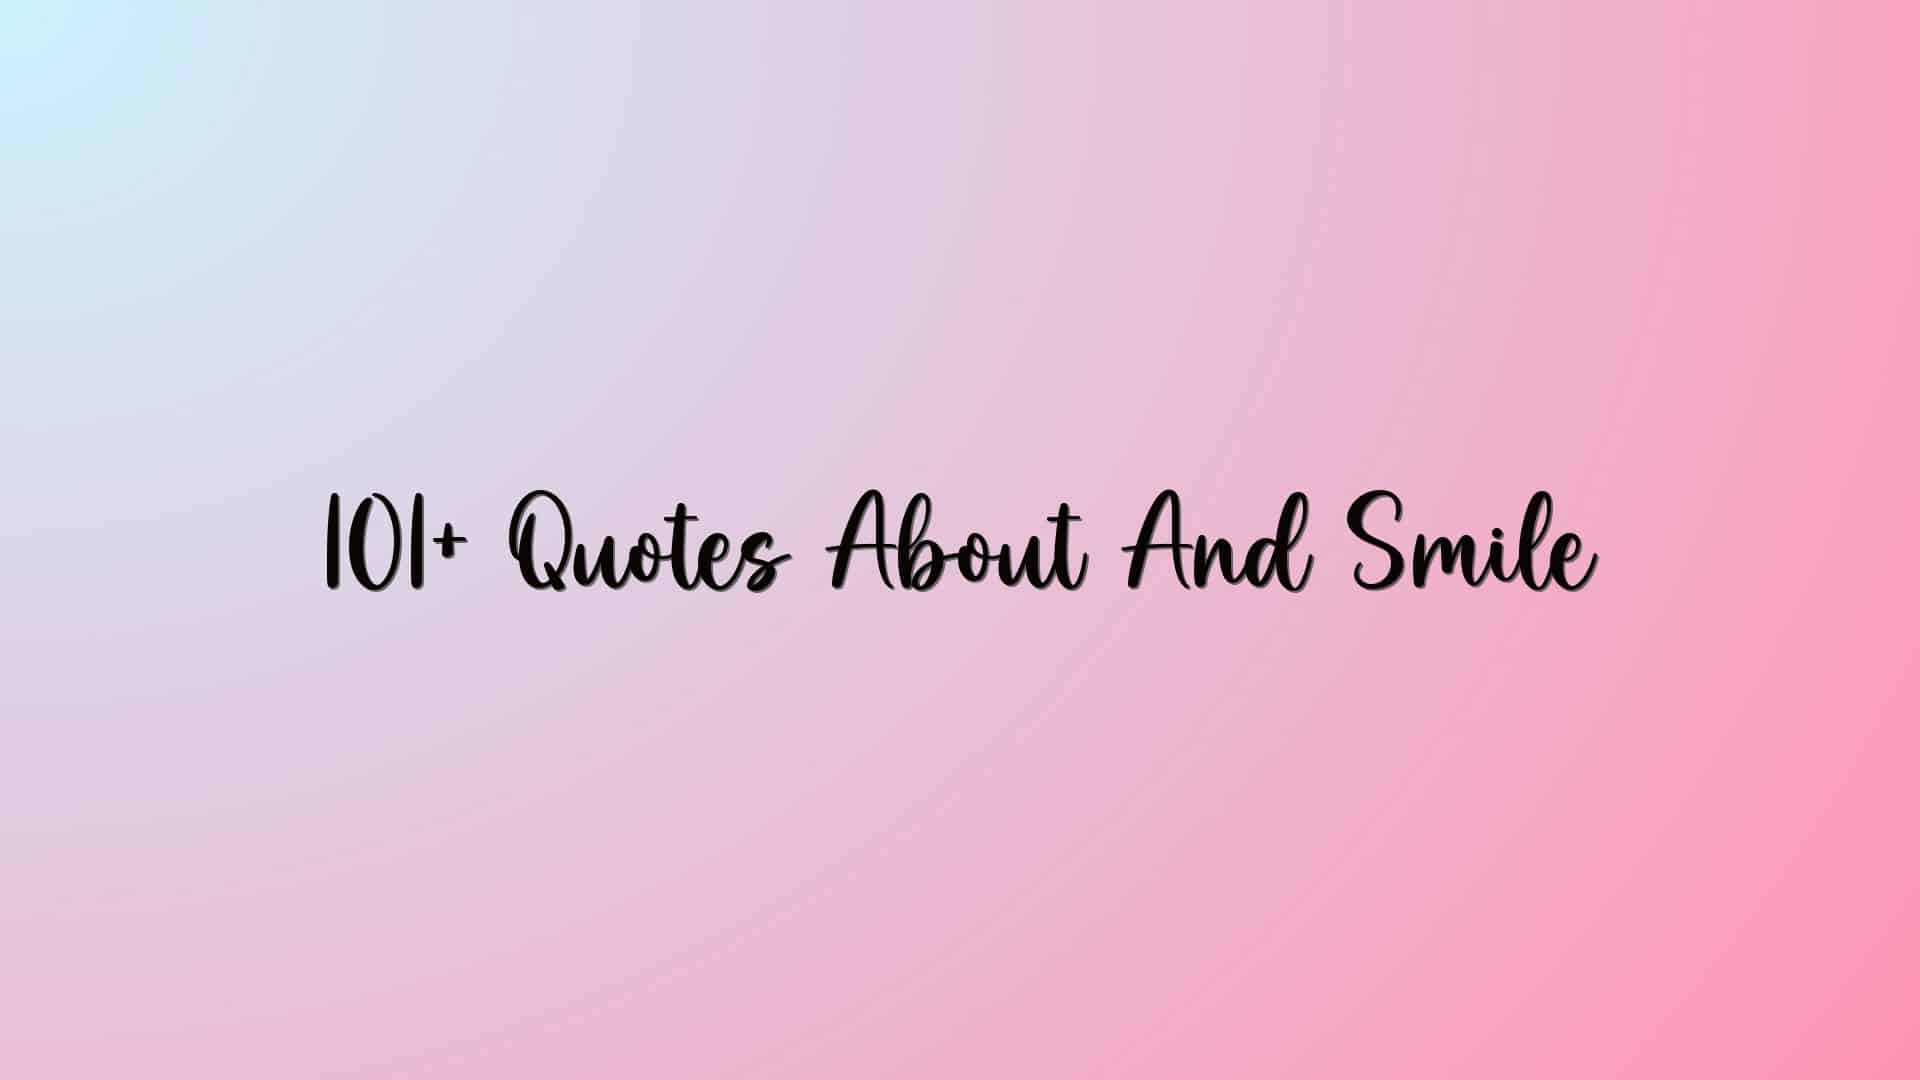 101+ Quotes About And Smile